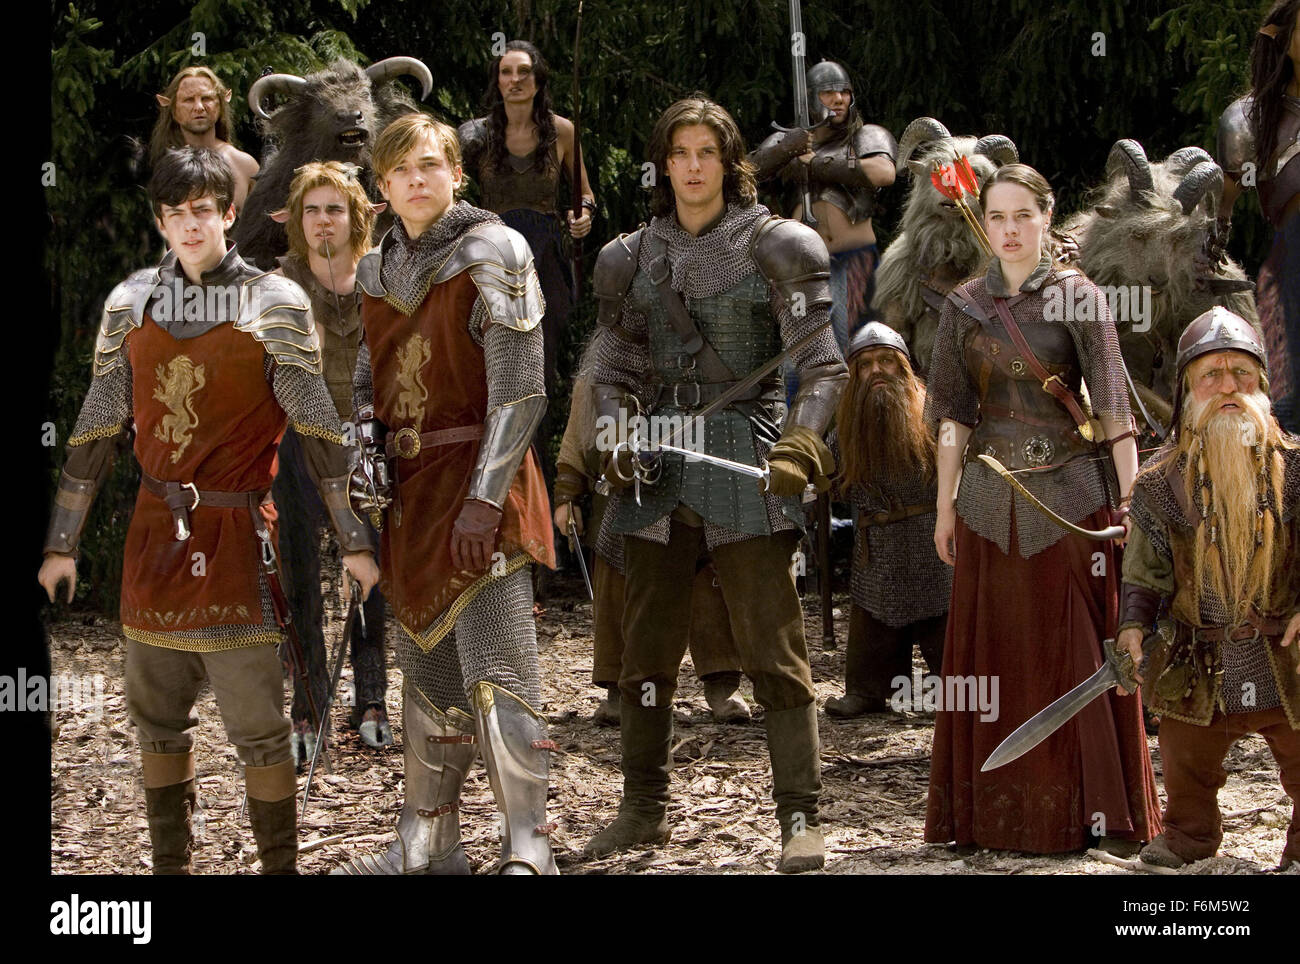 RELEASE DATE: May 16, 2008. MOVIE TITLE: The Chronicles of Narnia: Prince Caspian. STUDIO: Walt Disney Pictures. PLOT: The Pevensie siblings return to Narnia, where they are enlisted to once again help ward off an evil king and restore the rightful heir to the land's throne, Prince Caspian. PICTURED: SKANDAR KEYNES as Edmund Pevensie, WILLIAM MOSELEY as Peter Pevensie, BEN BARNES as Prince Caspian, ANNA POPPLEWELL as Susan Pevensie and PETER DINKLAGE as Trumpkin. Stock Photo